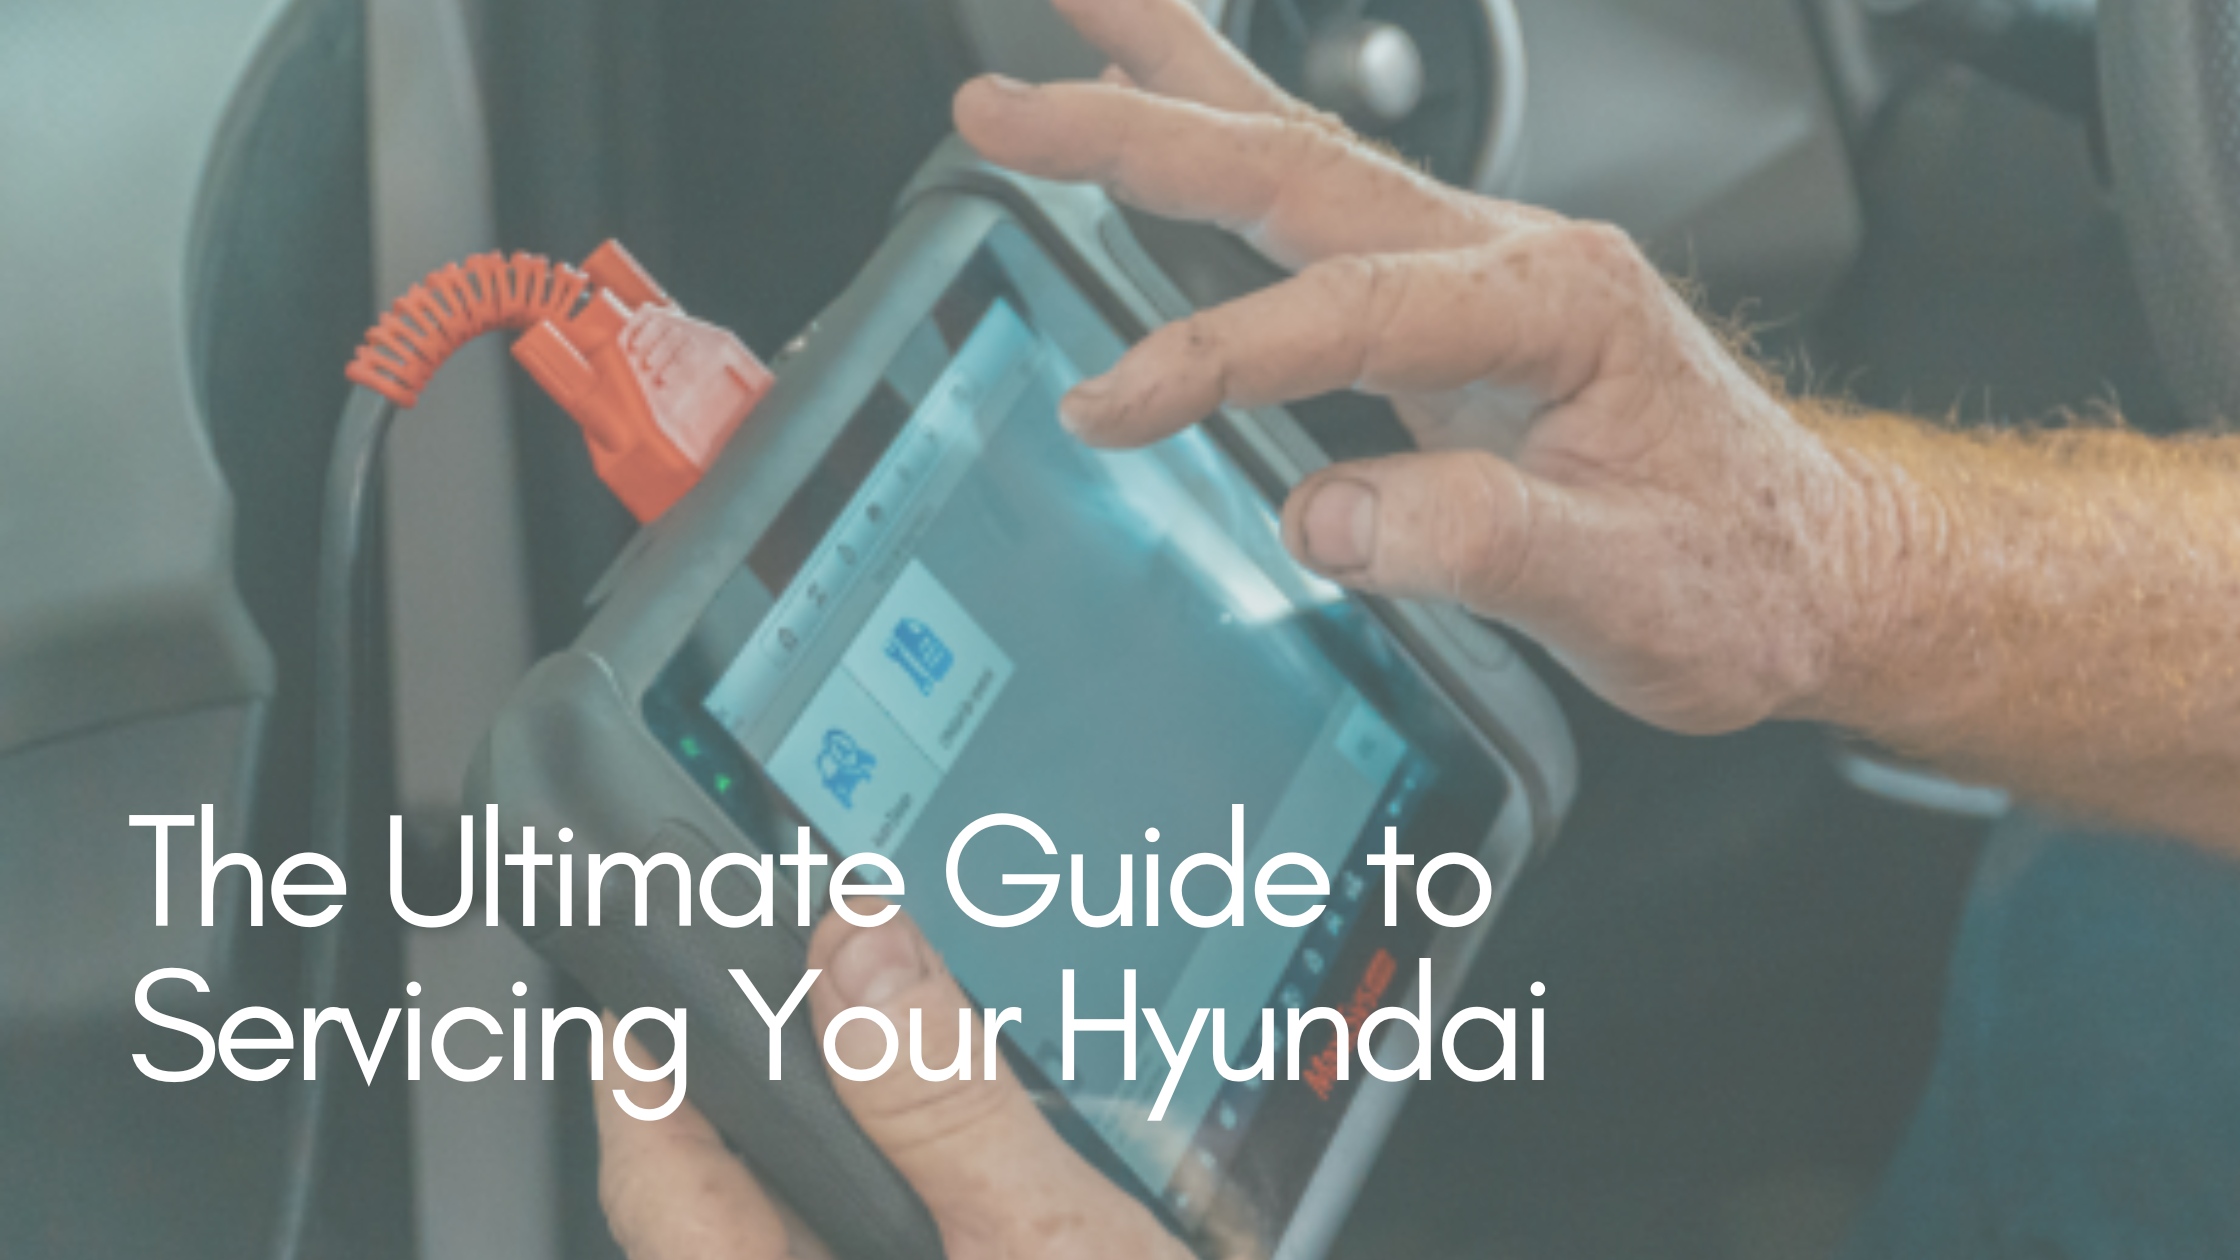 The Ultimate Guide to Servicing Your Hyundai